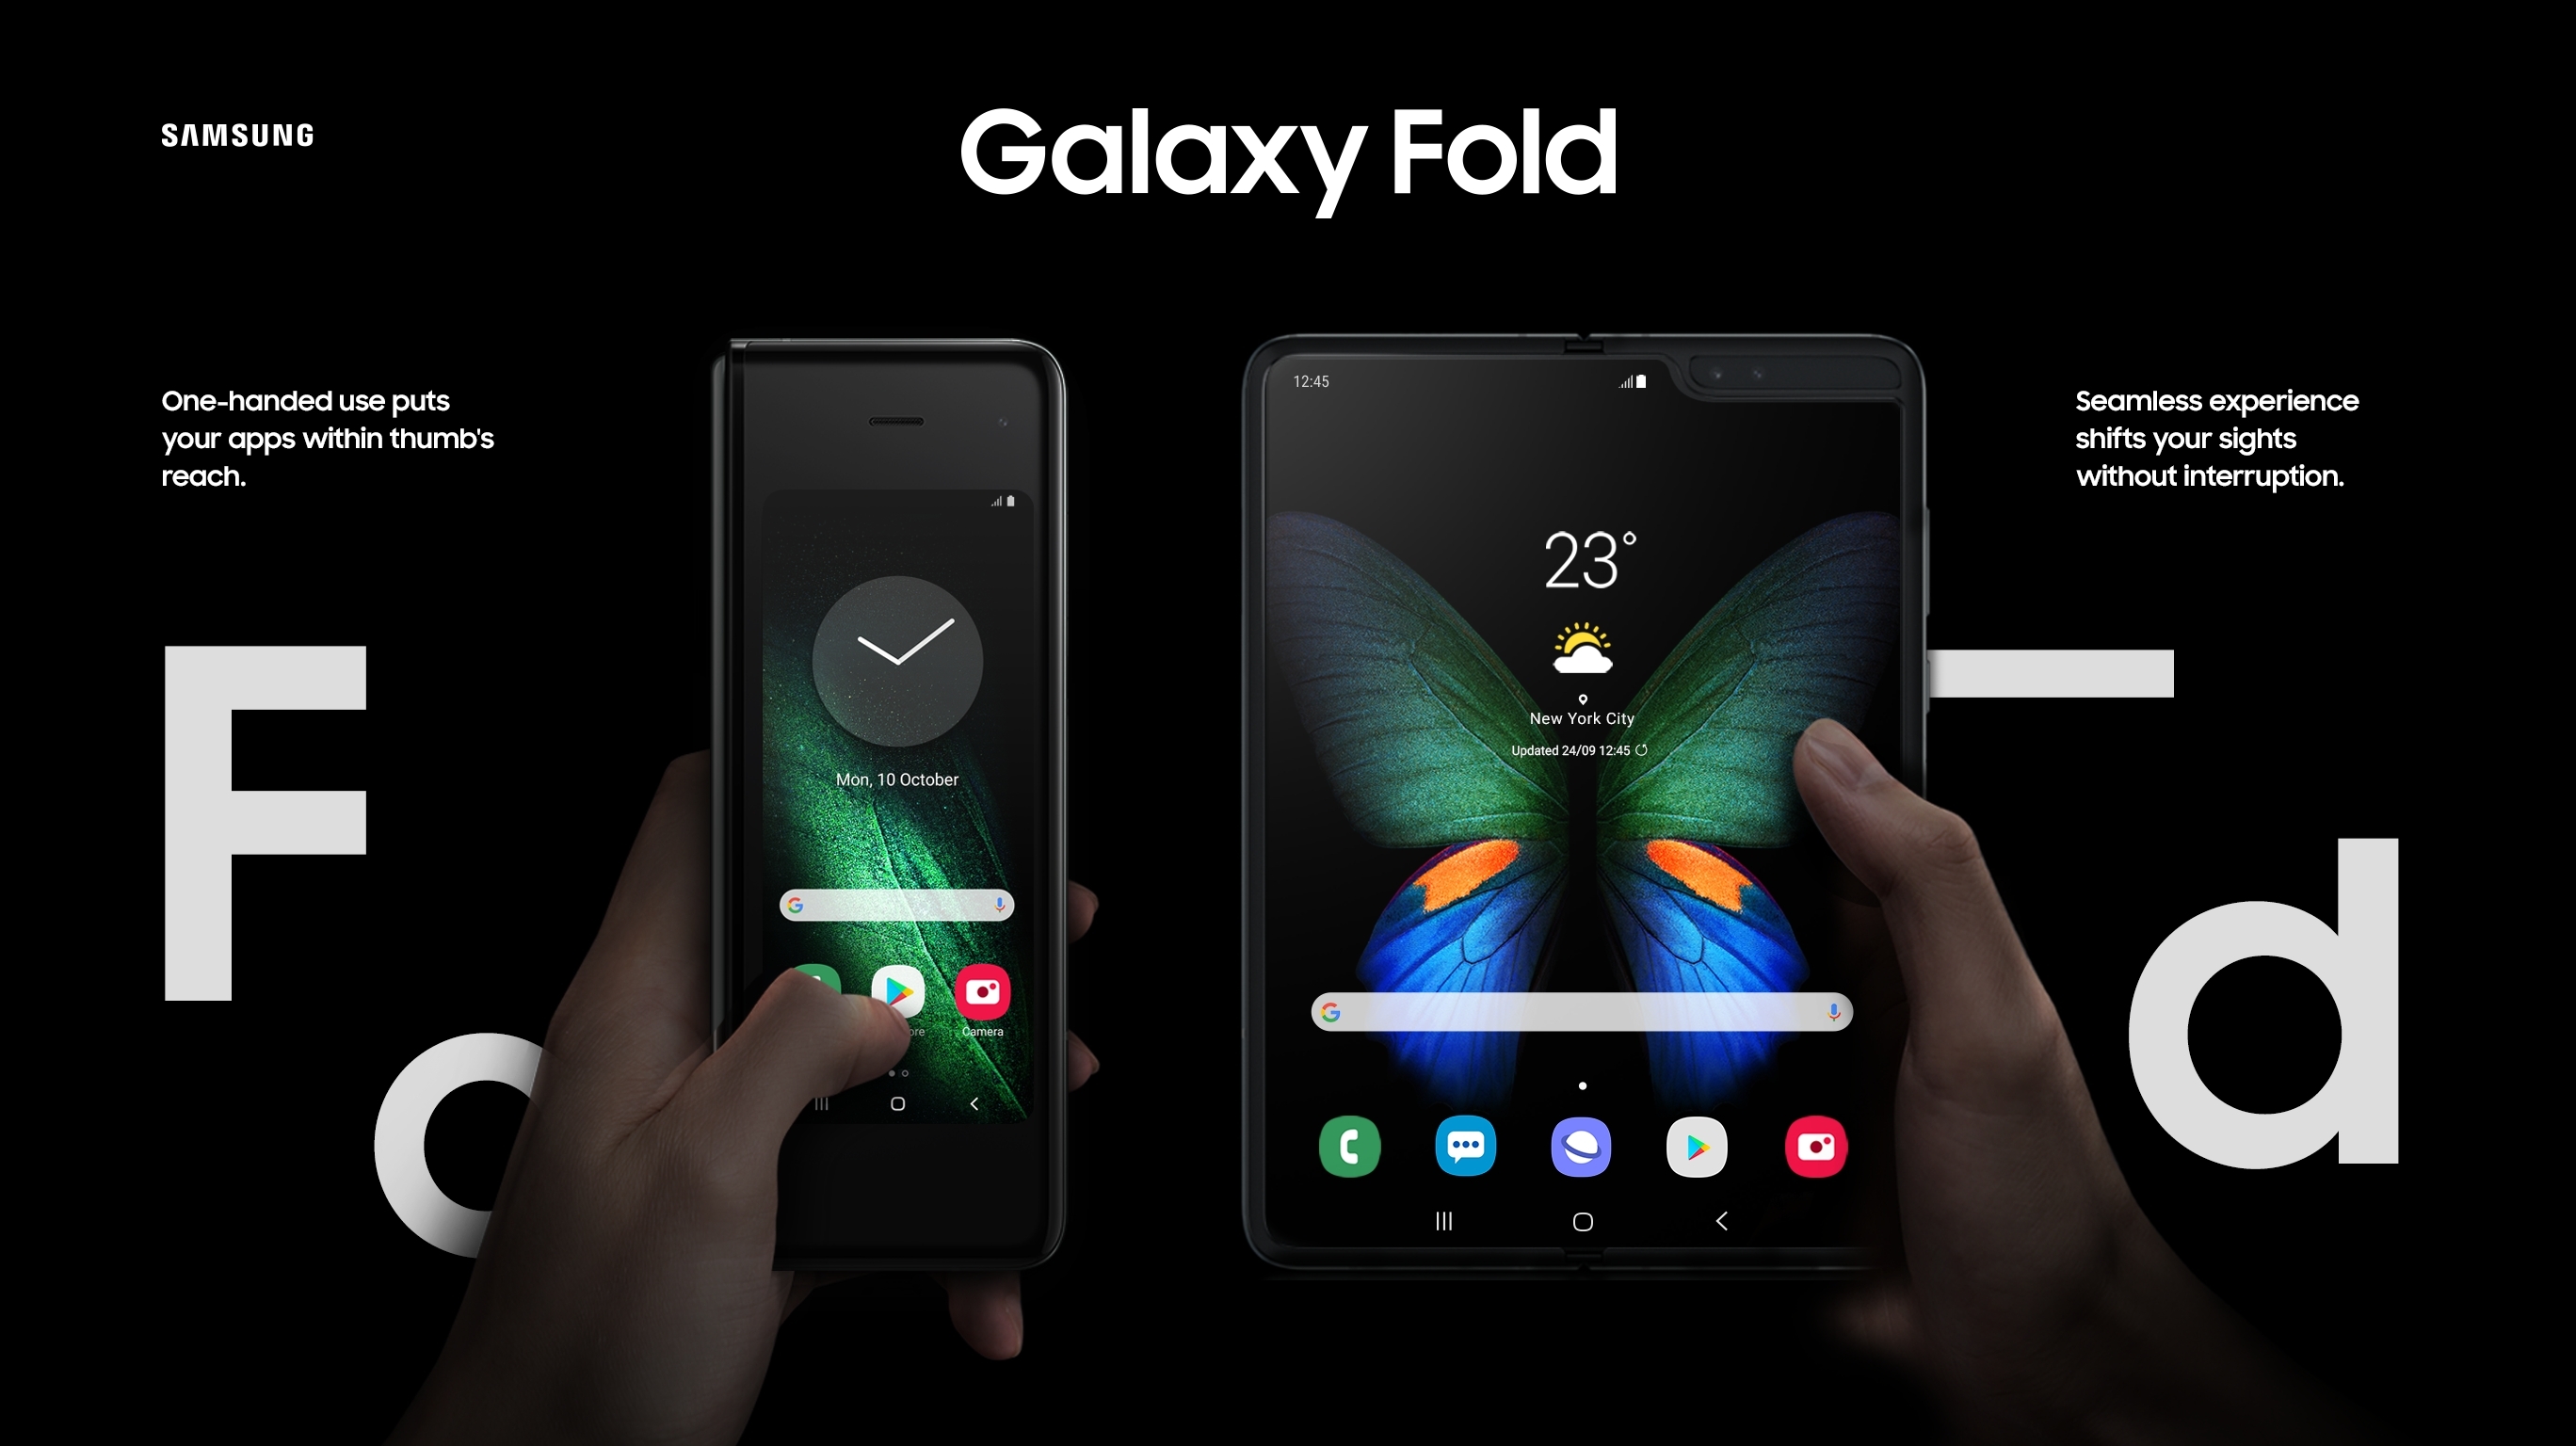 Foldable UX for GALAXY FOLD